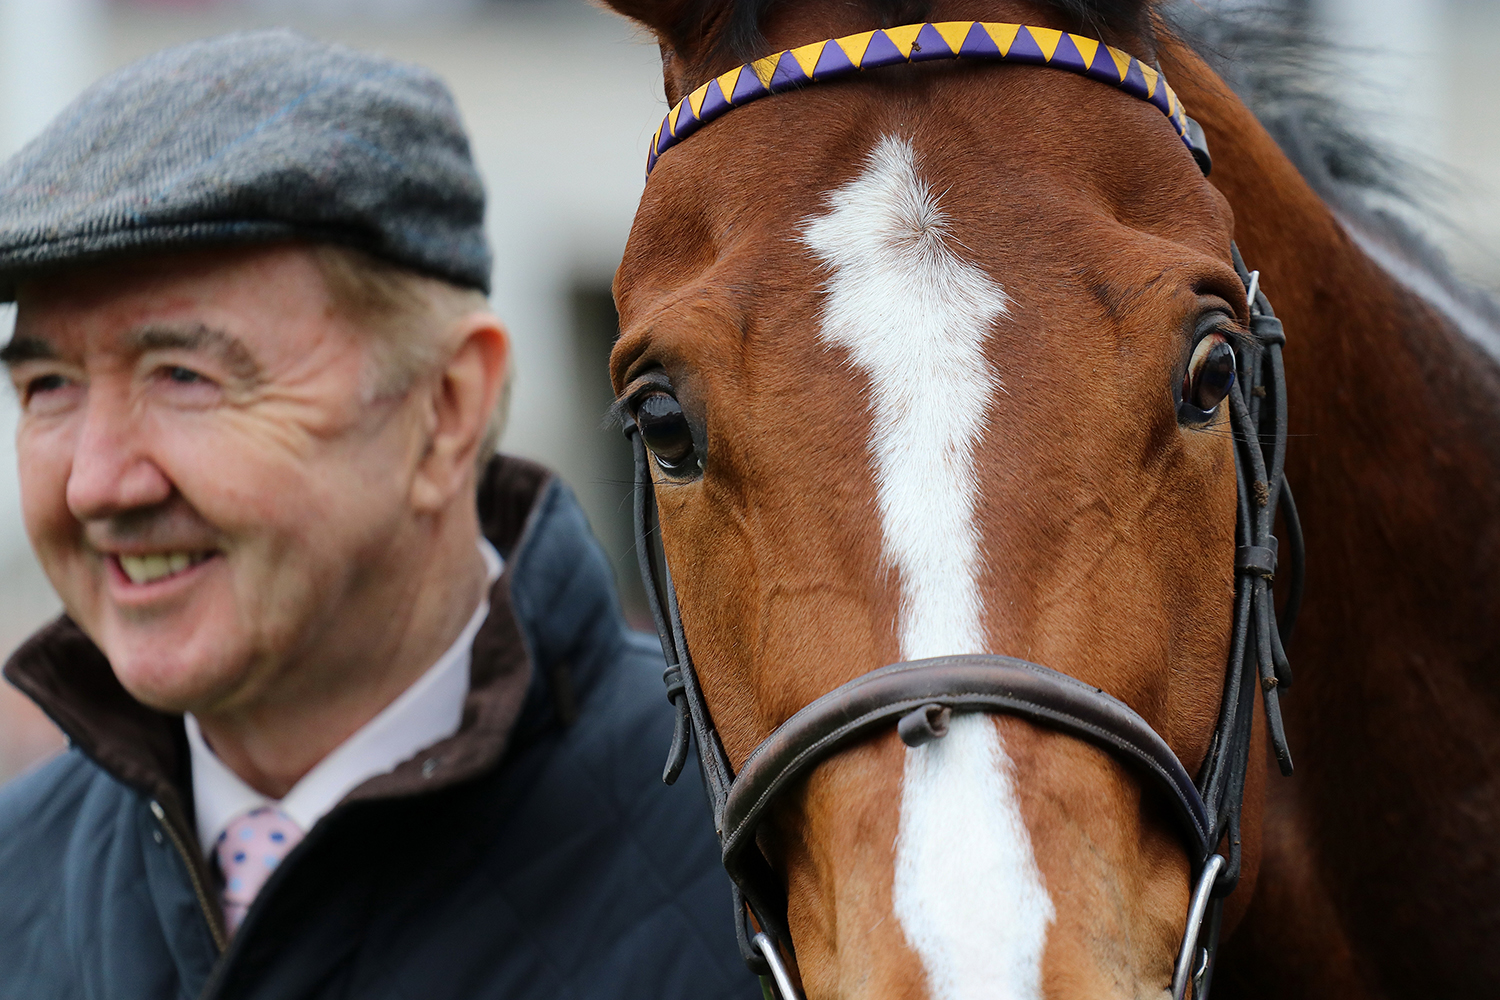 Ace of Diamonds poses with Dermot Weld after winning at Leopardstown on April 5th. Photo: David Betts